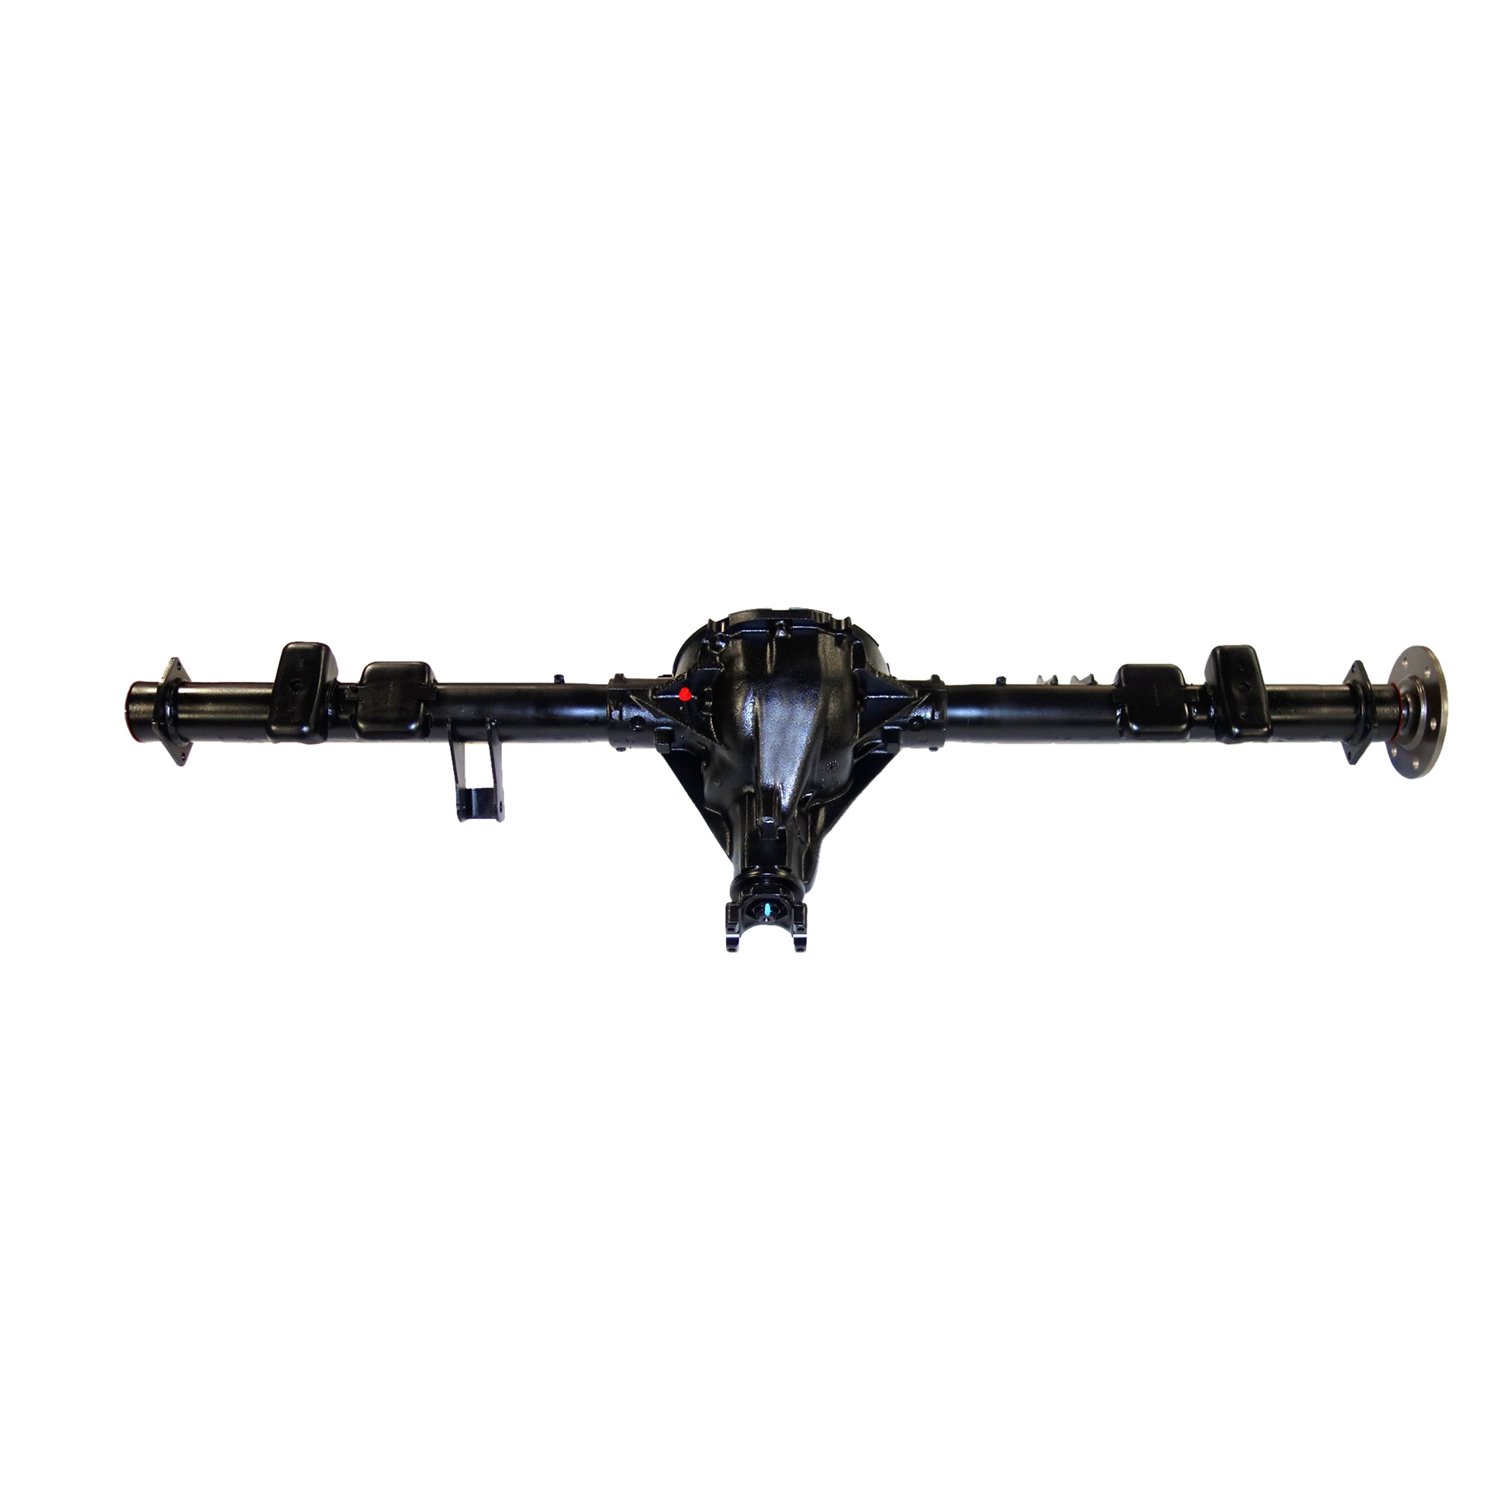 Remanufactured Axle Assy for GM 8.5" 92-94 GM Suburban 1500, 2wd, 3.73 , Posi LSD